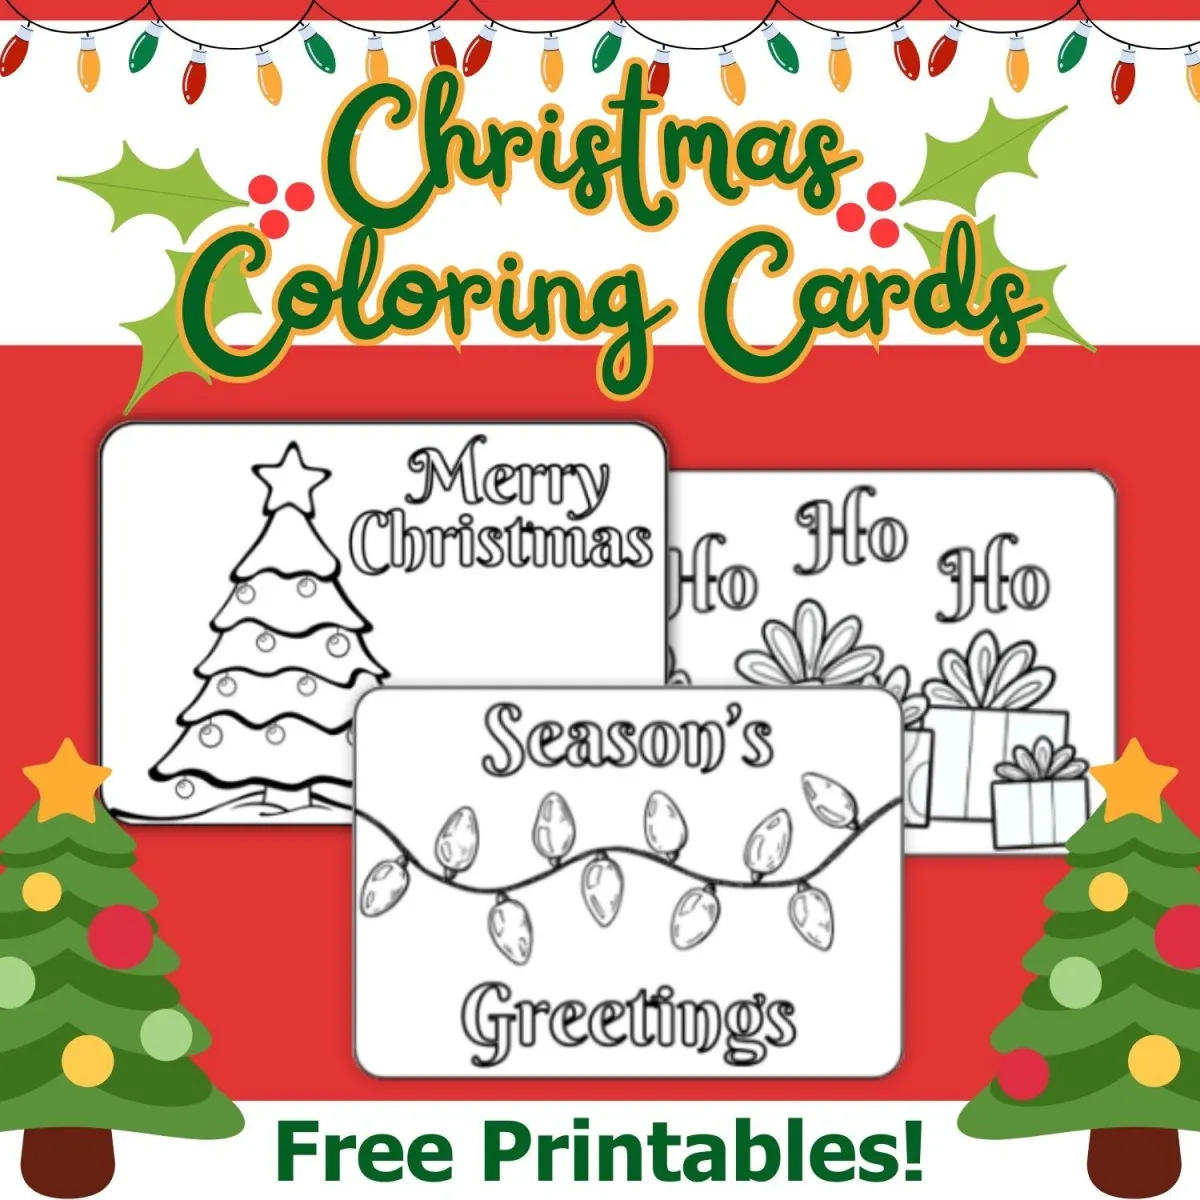 Christmas cards to color